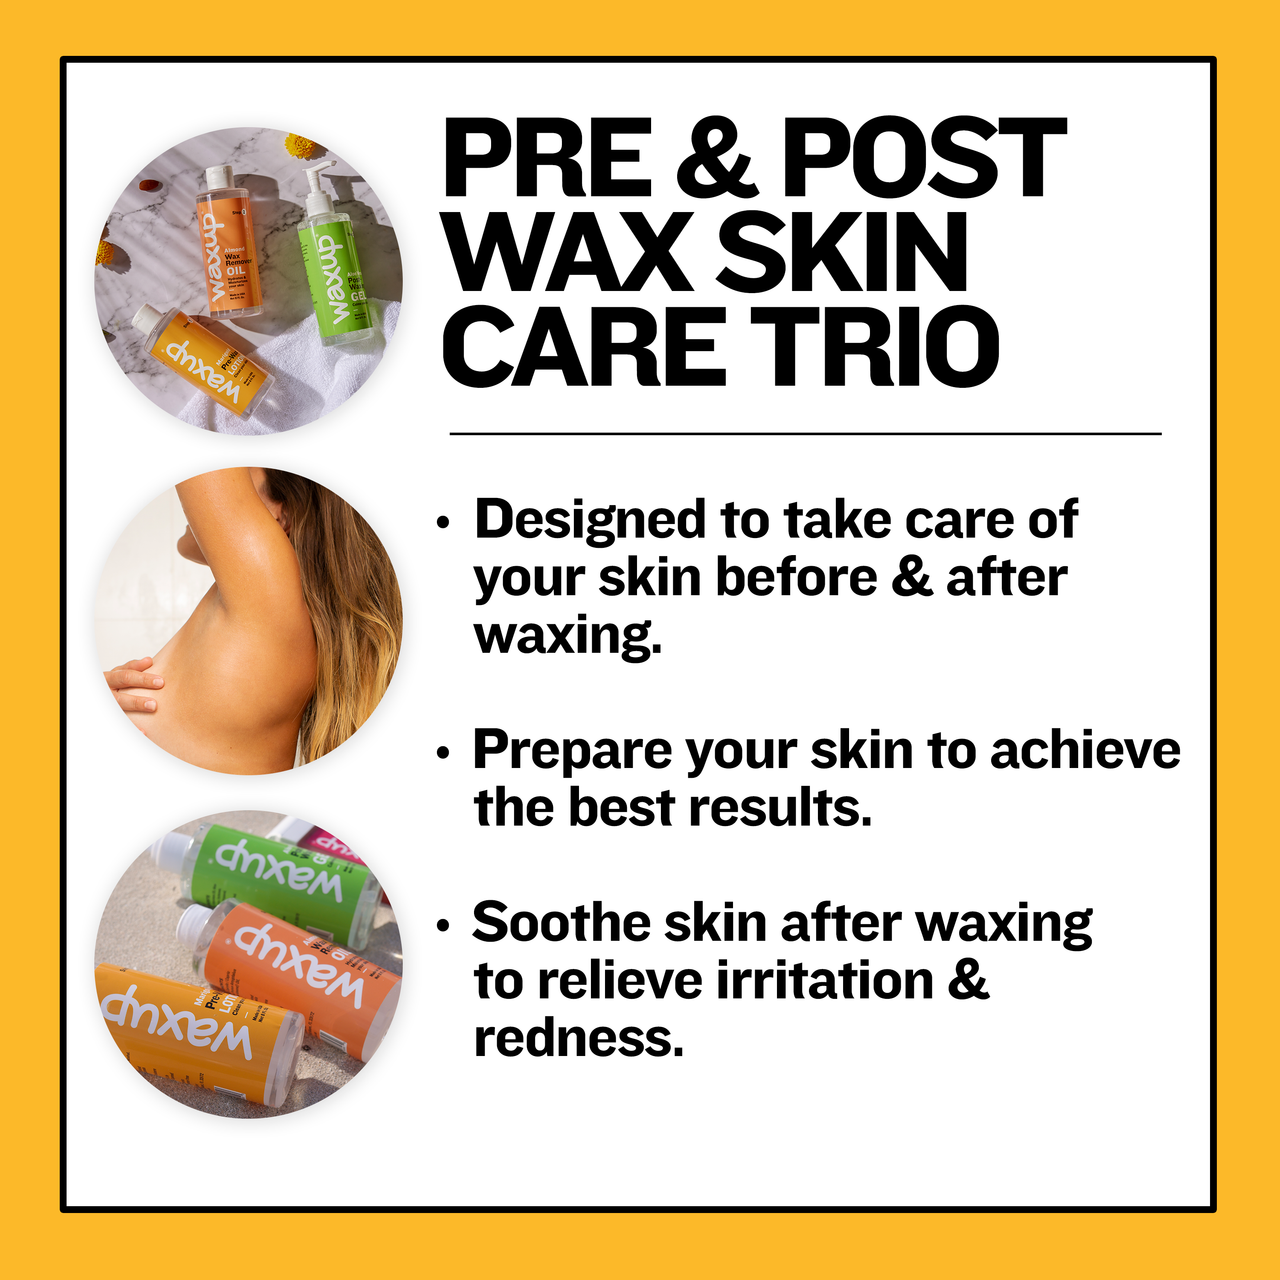 Before And After Waxing Skin Care Kit - thatswaxup -  - Pre and Post Waxing Skin Care - waxup hair removal wax body waxing kit women and men professional waxing supplies